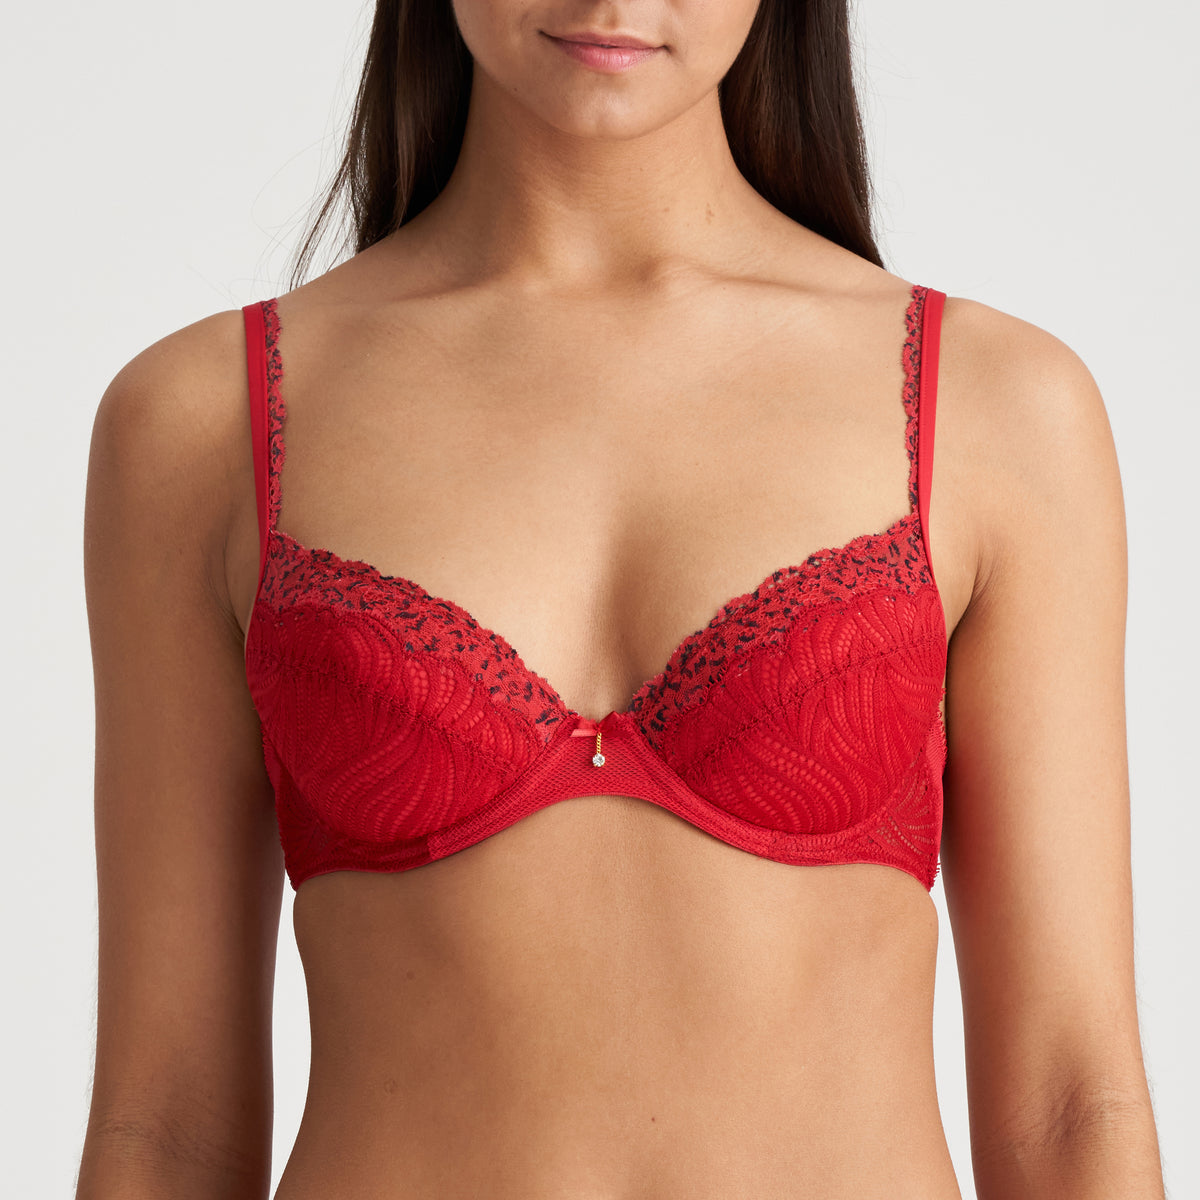 SALE Coely Push Up Bra from Marie Jo